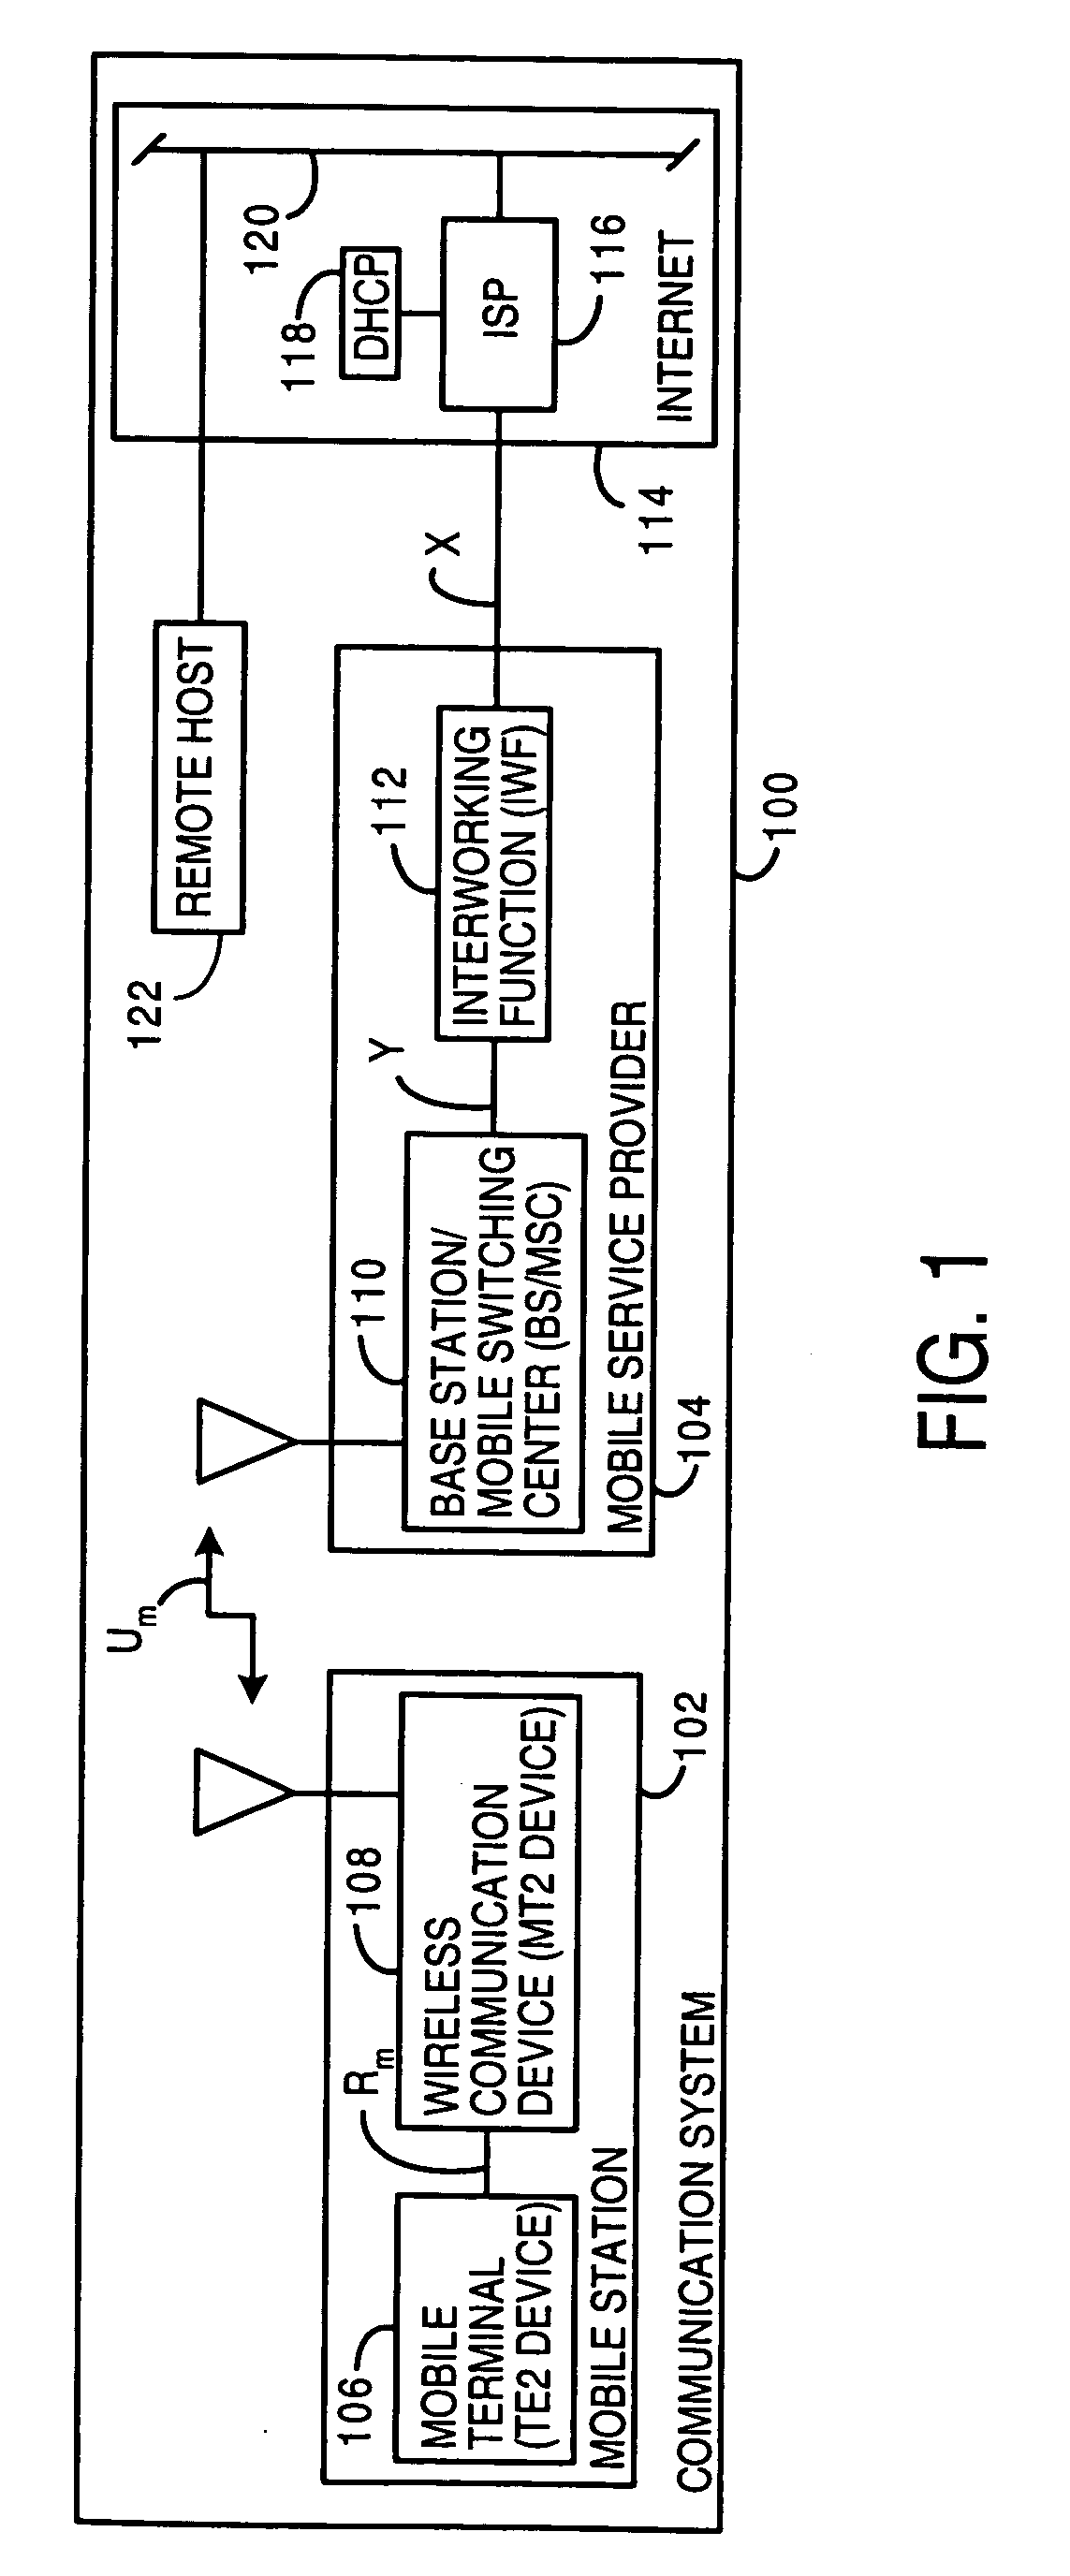 Dynamically provisioned mobile station and method therefor